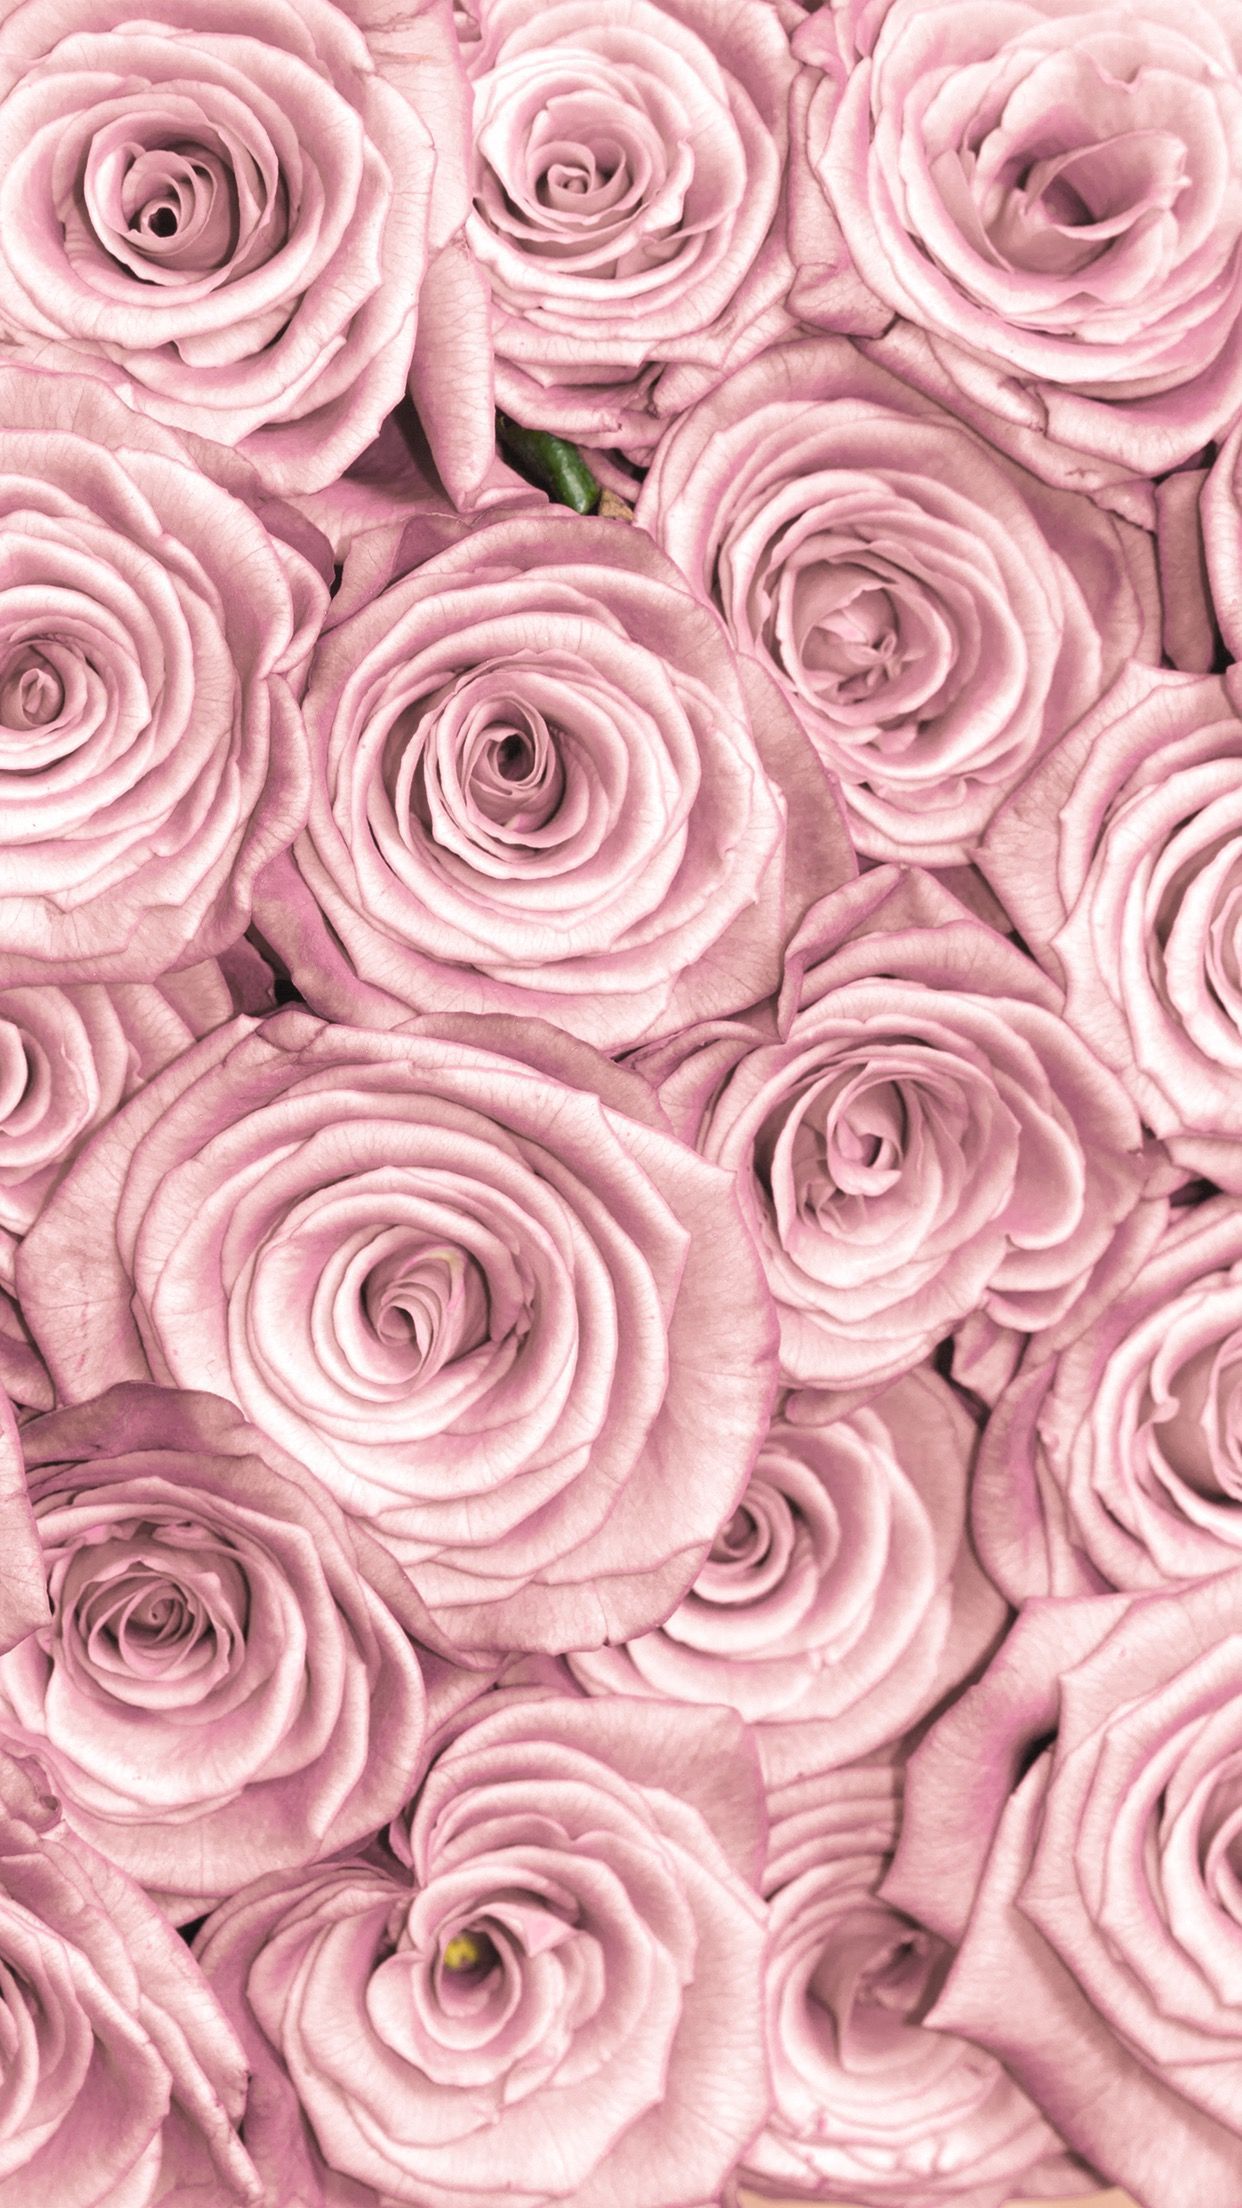 Wall paper rosa apple 49 Ideas wall 777504323154346212  White roses  wallpaper Best flower wallpaper Pink flowers wallpaper